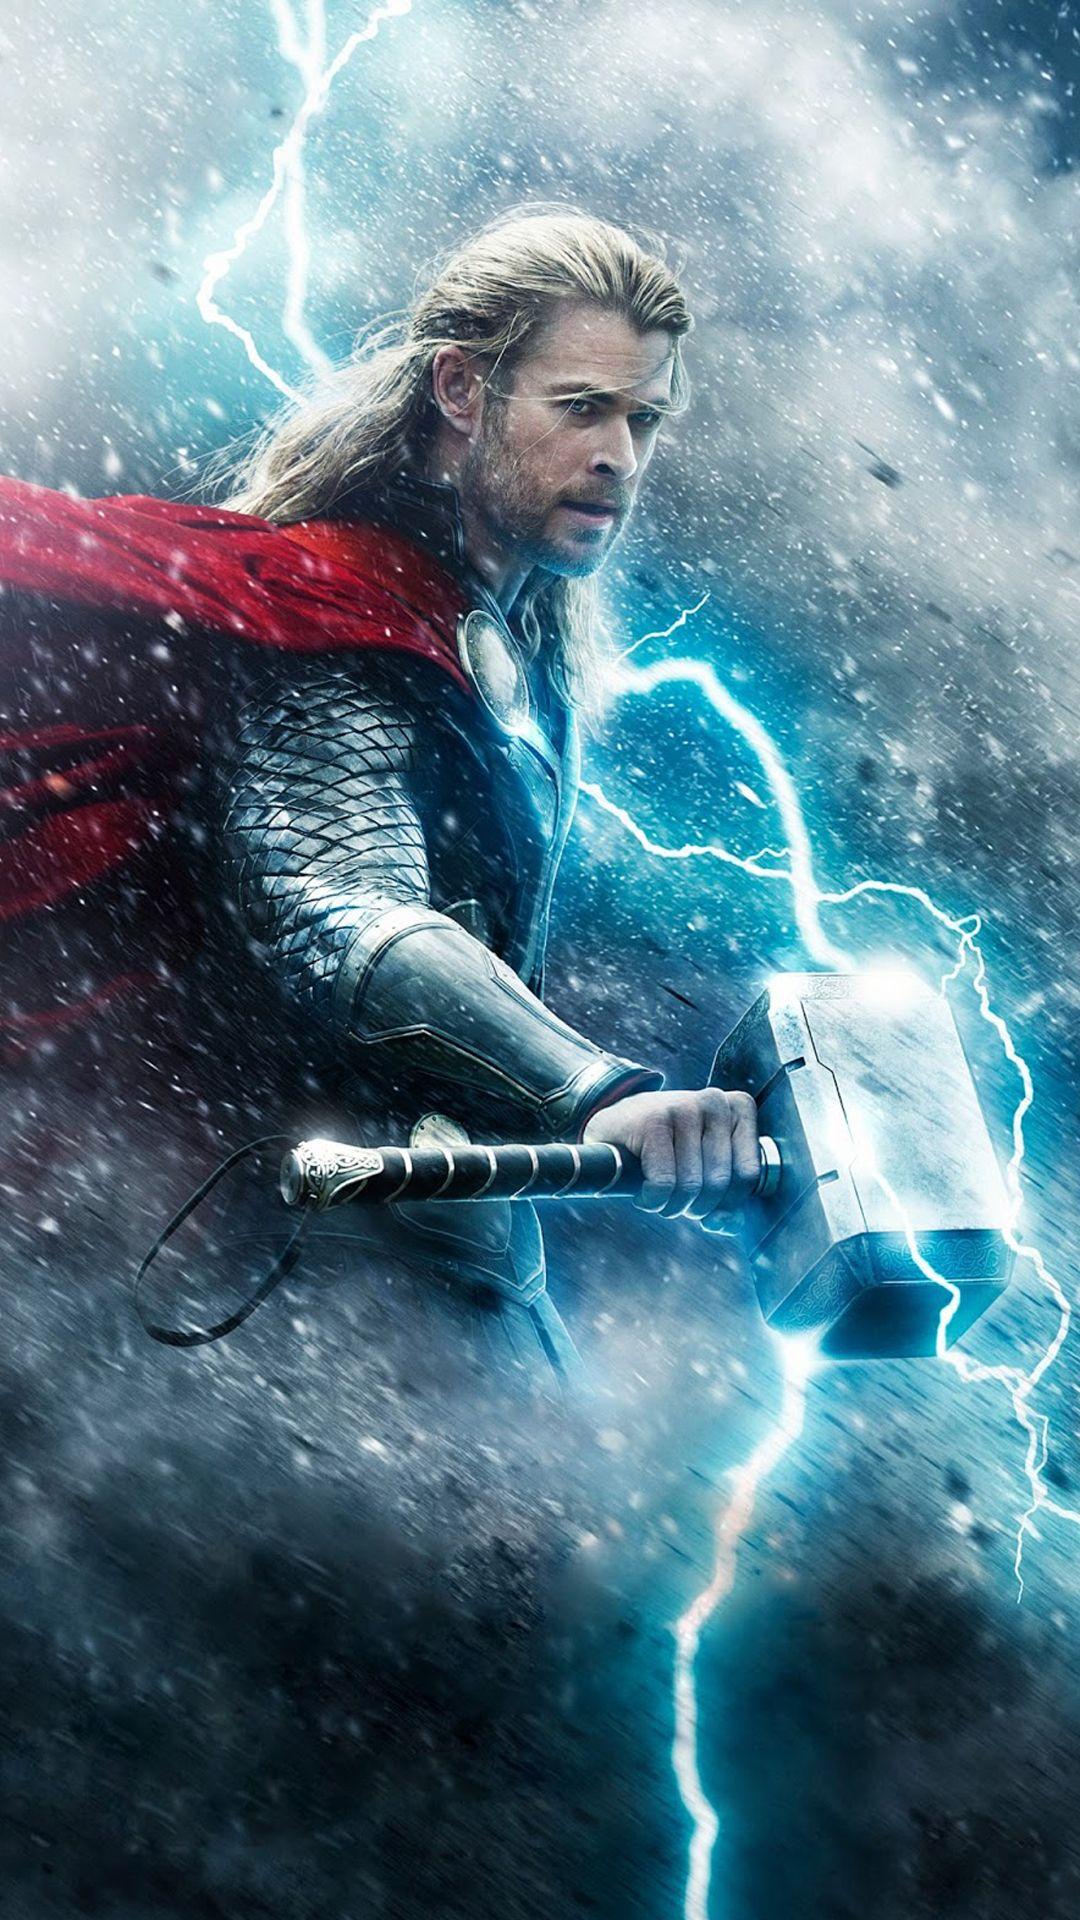 thor 2 full movie download